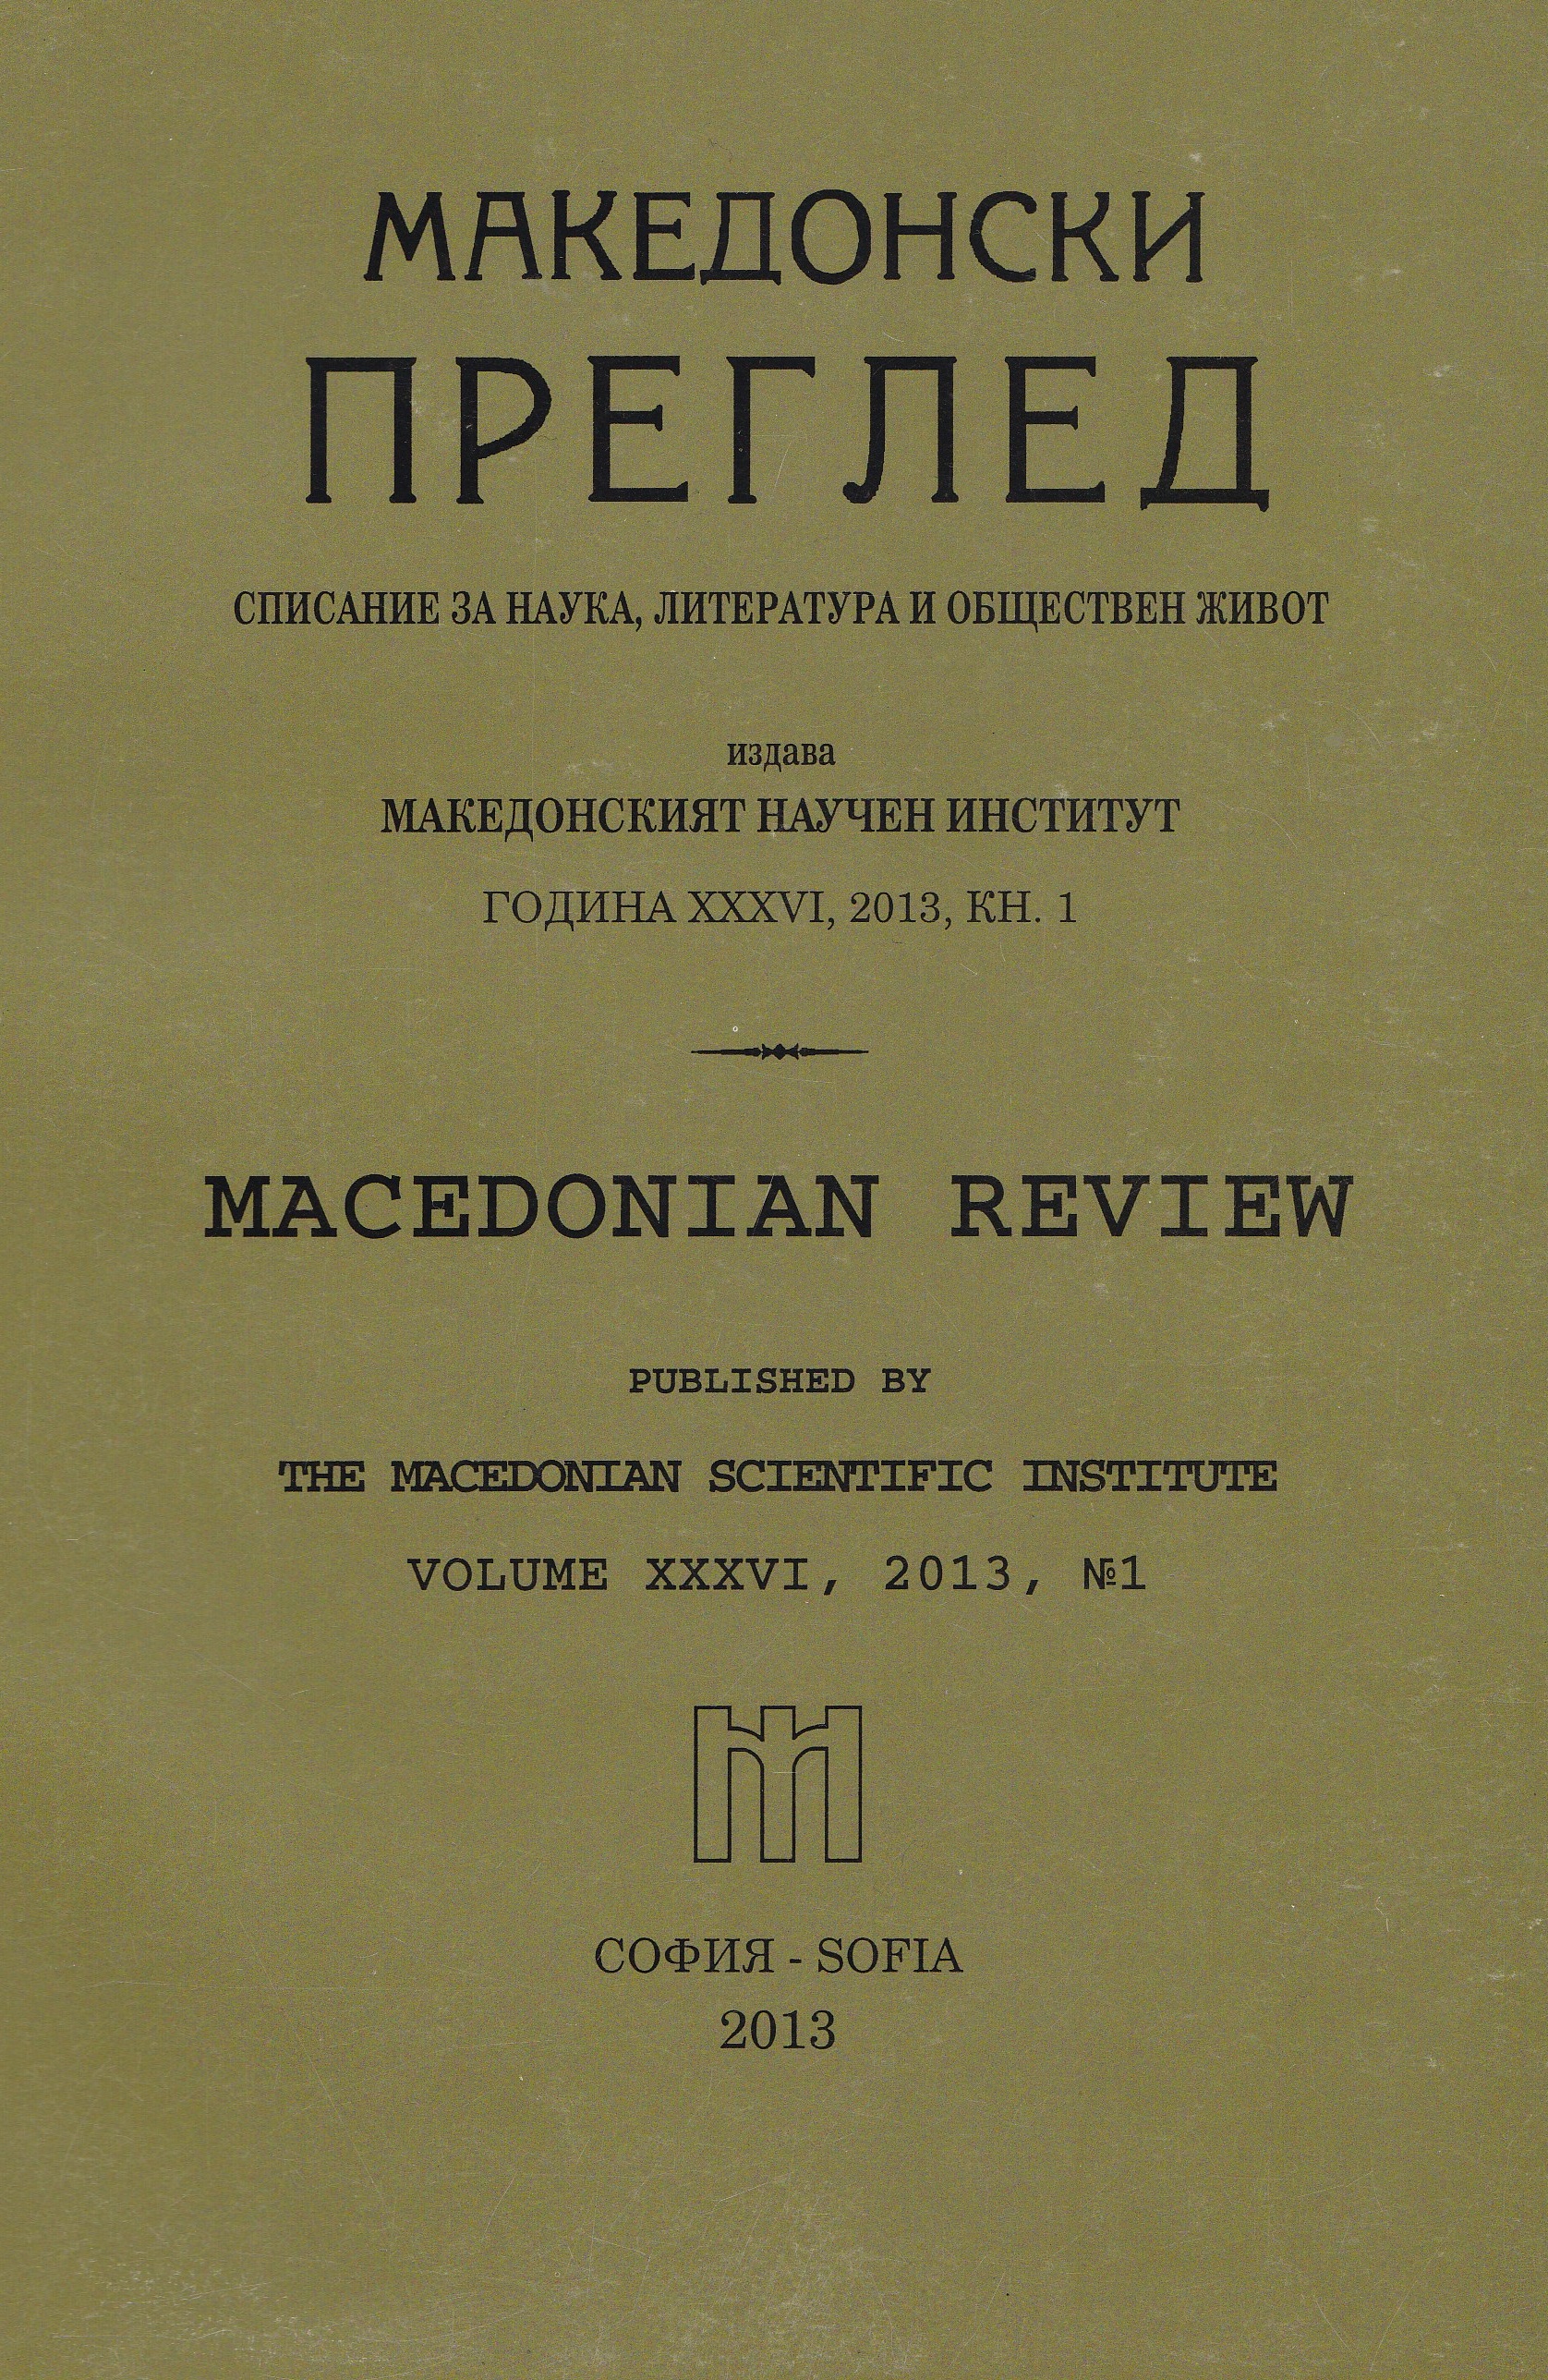 Interview with Victor Kanzurov: The ship of Macedonia travels in complete isolation Cover Image